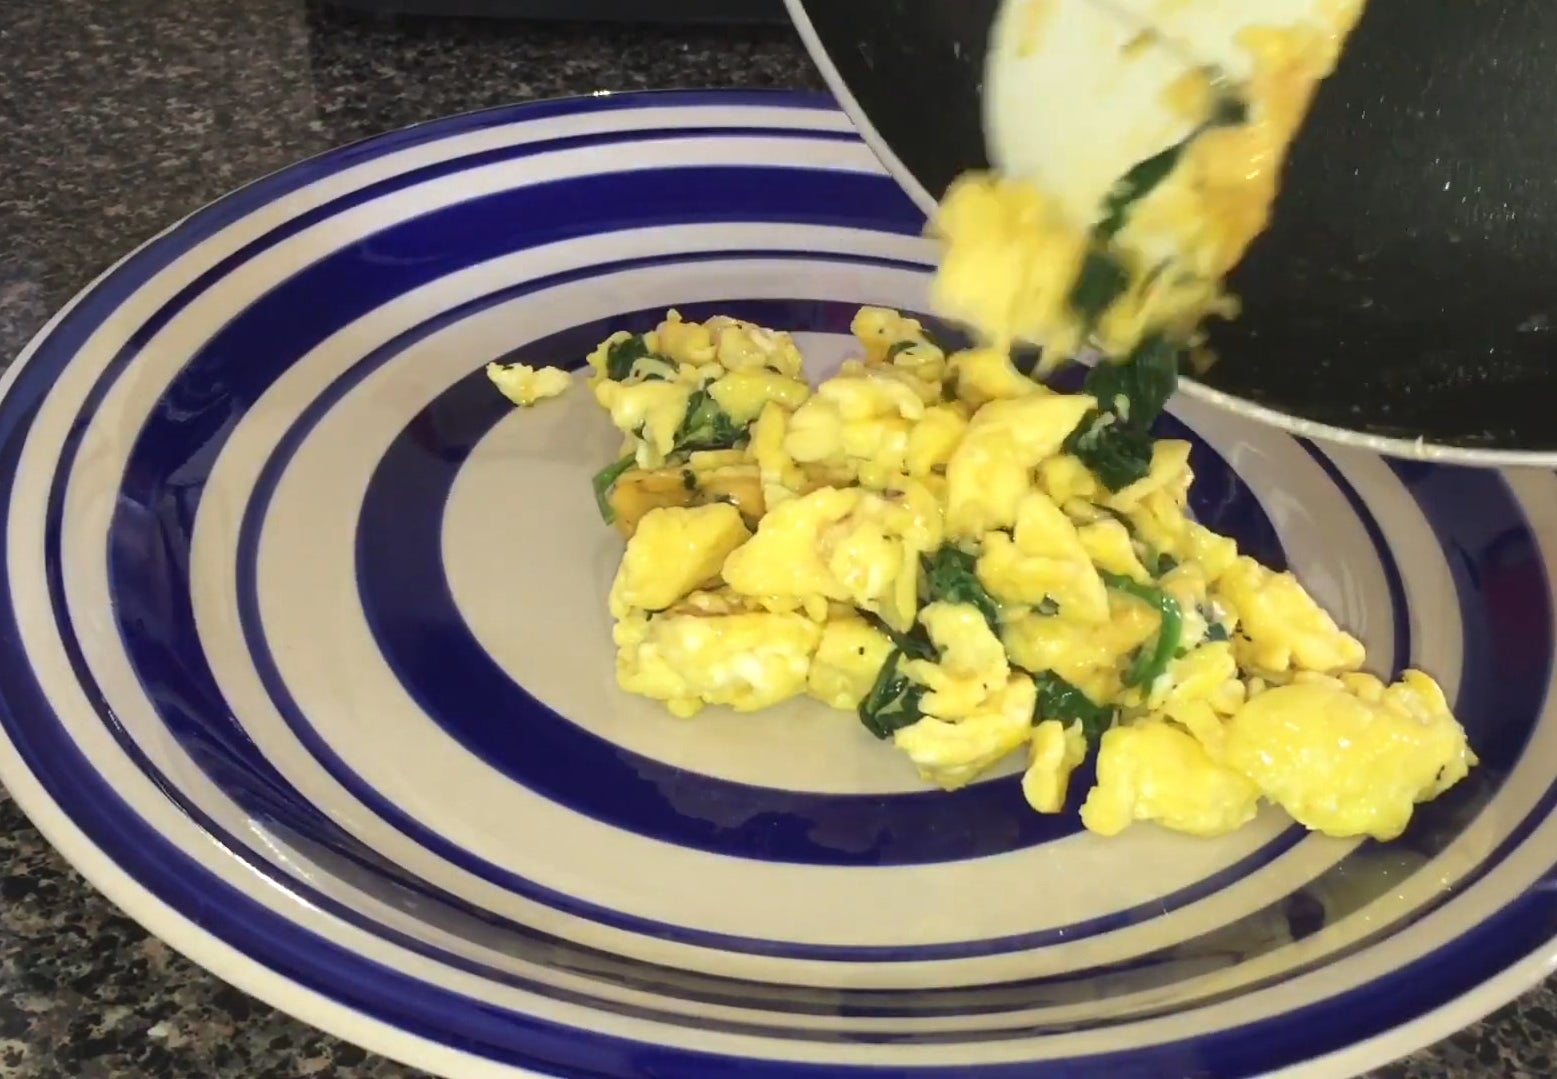 Spinach and eggs from the pan to plate